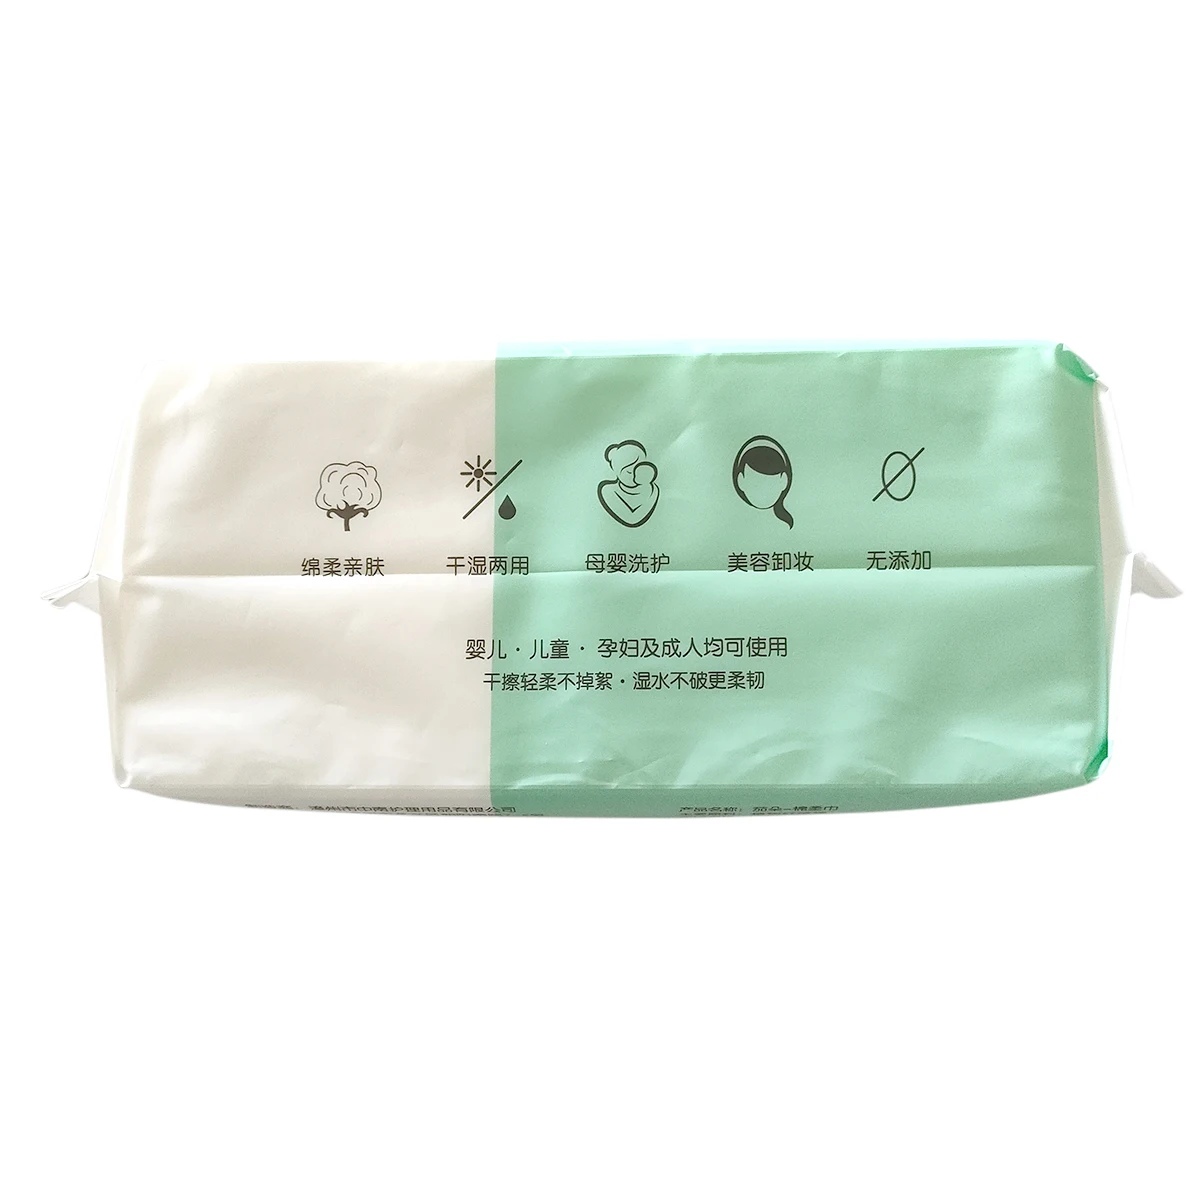 WET OR DRY Use daily cleansing facial towelettes, face Make up Remover Wipes Non Woven Cotton Towel facial clean Tissue